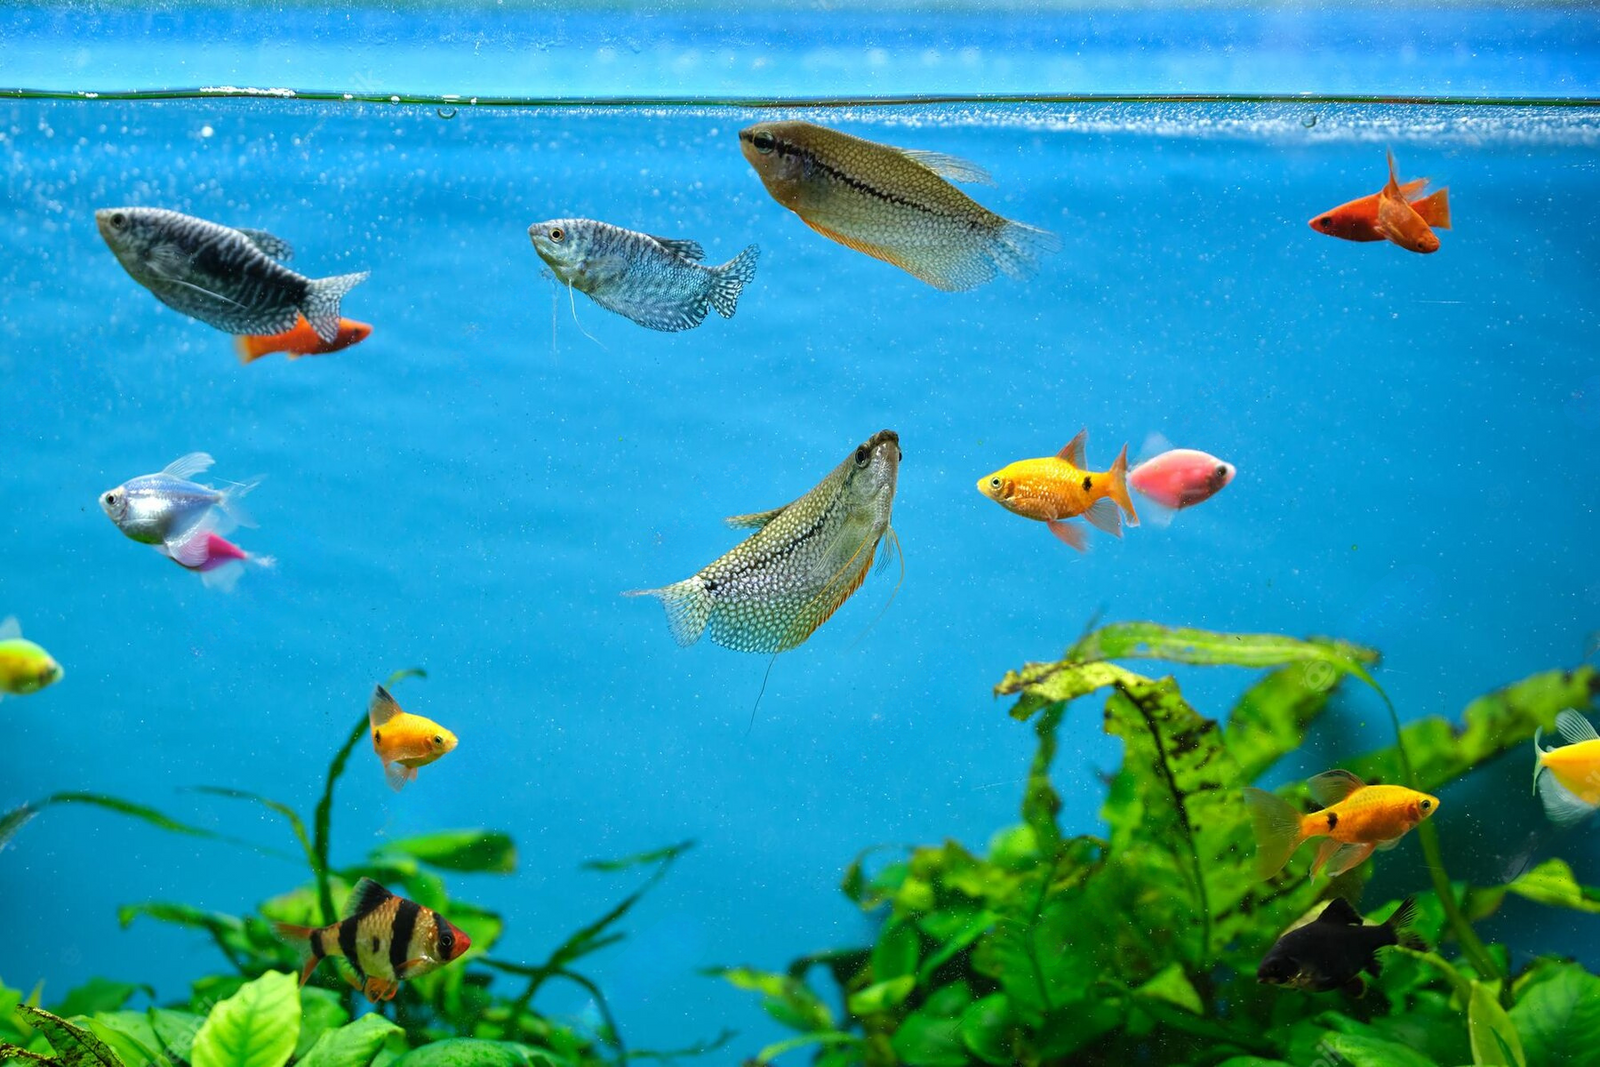 Relax and be mesmerized by the captivating beauty of a colorful aquarium.